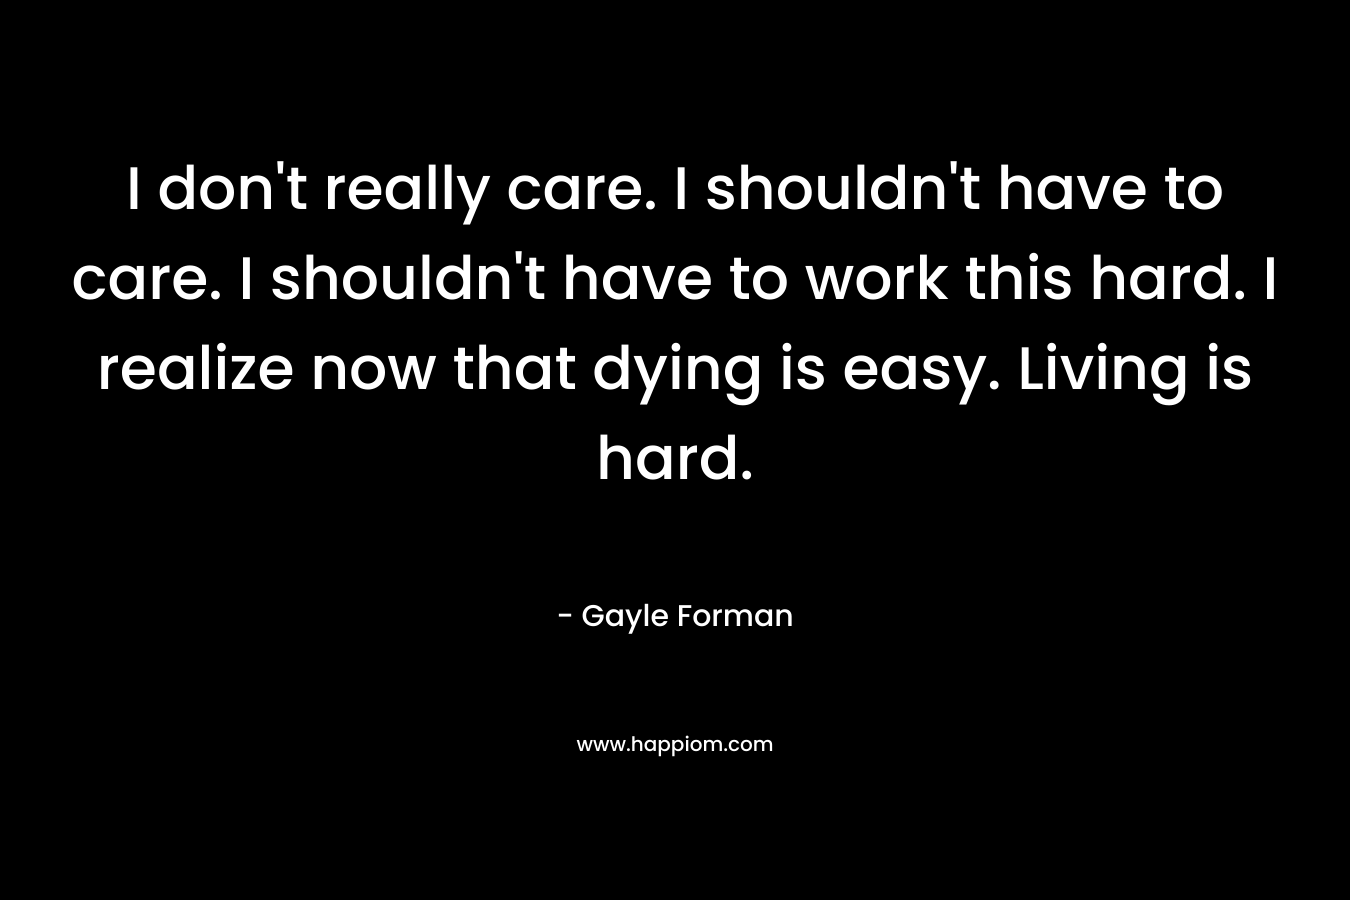 I don’t really care. I shouldn’t have to care. I shouldn’t have to work this hard. I realize now that dying is easy. Living is hard. – Gayle Forman